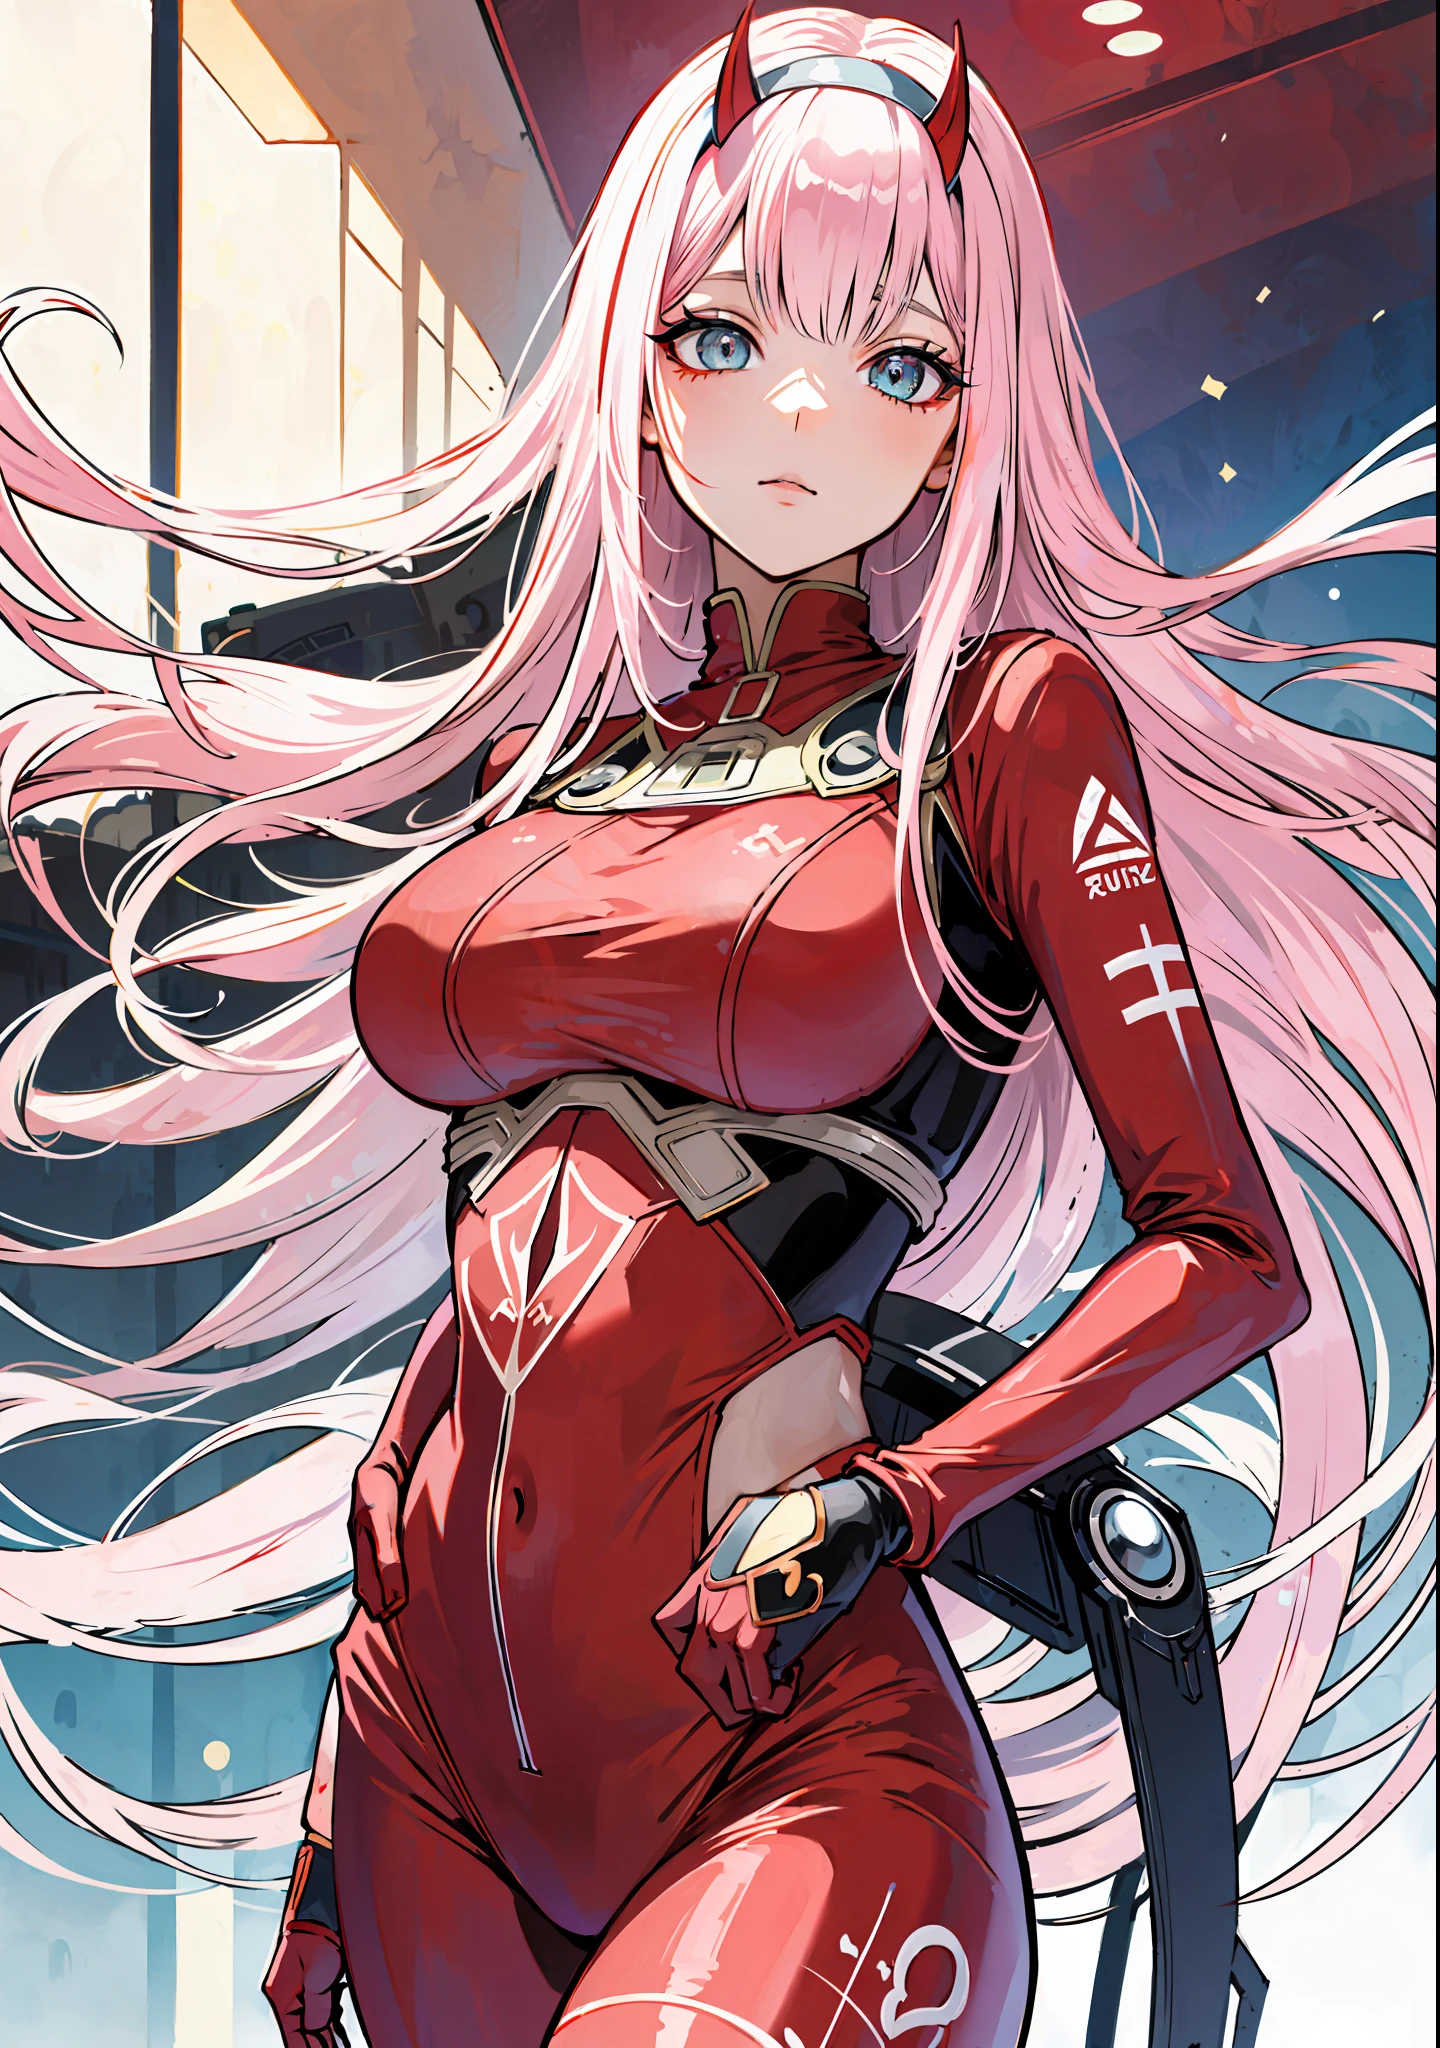 Masterpiece, top quality, best quality, official art, beautiful and aesthetic, anime, 1girl, Zero Two, extremely detailed, colorful, more detailed ((ultra-detailed)), (highly detailed CG illustration), solo, pink hair, pair of horns, verd s eyes, long hair, (focus on character), pilot outfit, red bodysuit with white details, science fiction, blood